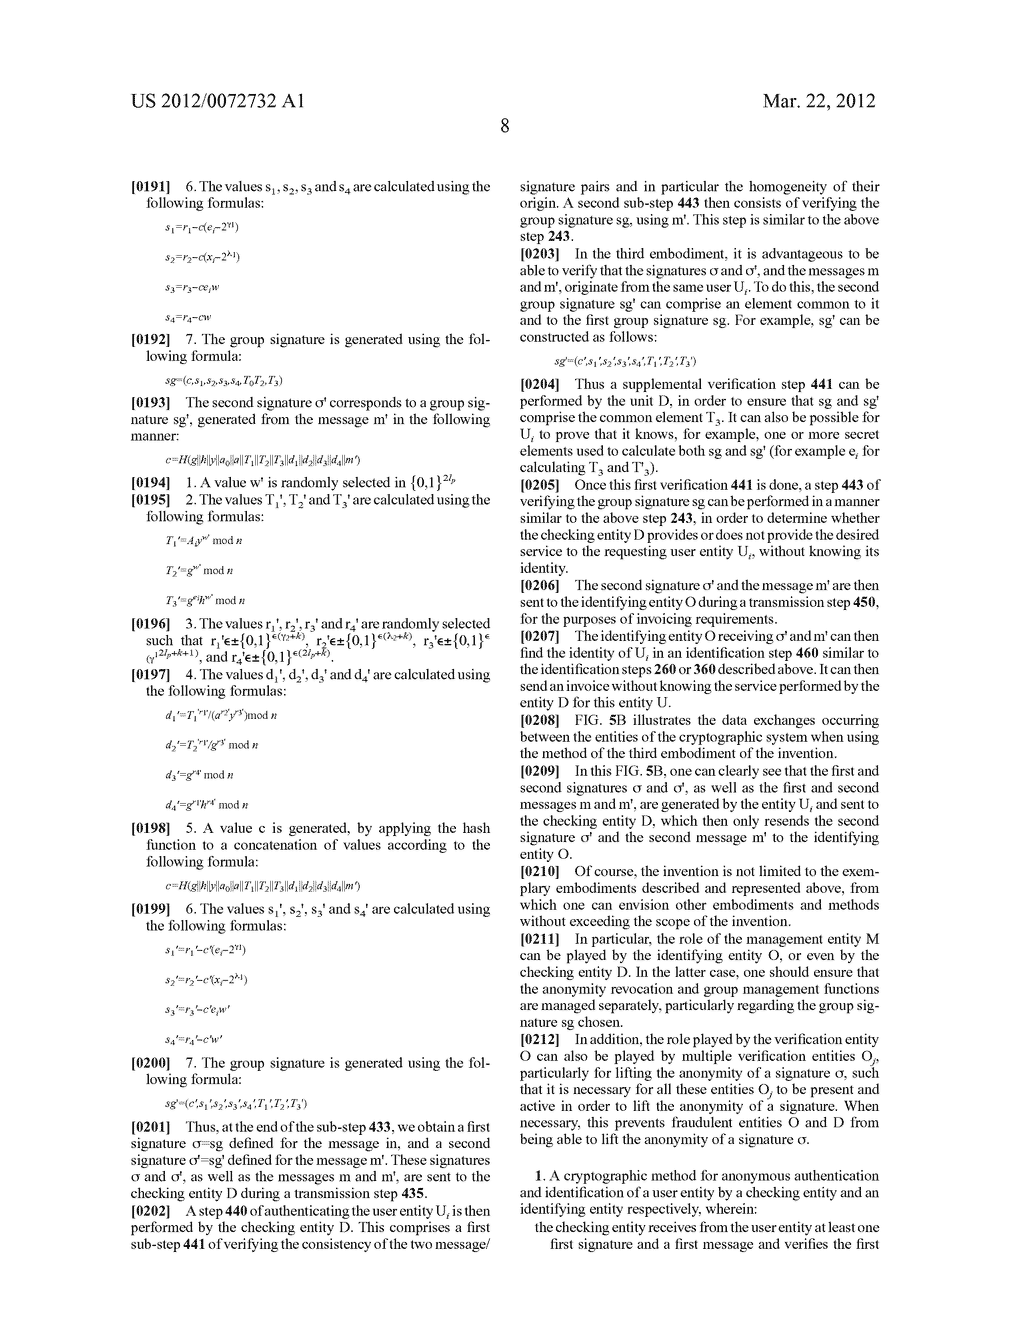   CRYPTOGRAPHIC METHOD FOR ANONYMOUS AUTHENTICATION AND SEPARATE     IDENTIFICATION OF A USER - diagram, schematic, and image 16